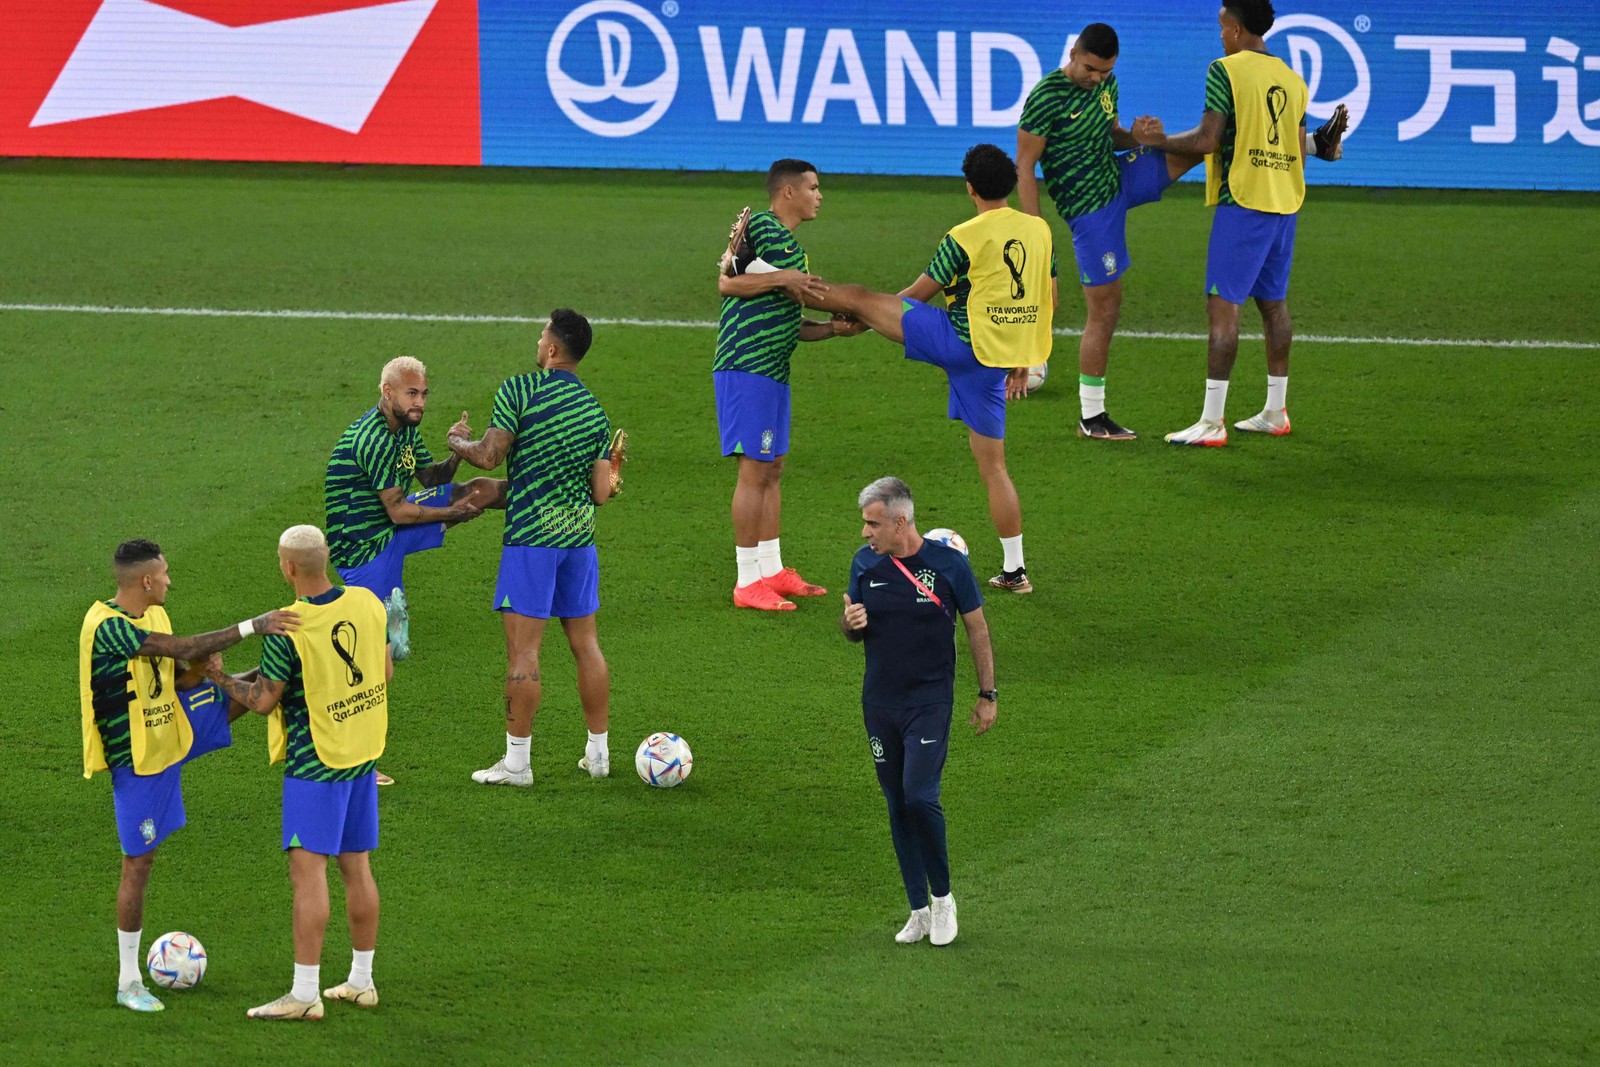 Brazil's players warm up ahead of the Qatar 2022 World Cup round of 16 football match between Brazil and South Korea at Stadium 974 in Doha on December 5, 2022 — Foto: . (Photo by Glyn KIRK / AFP)